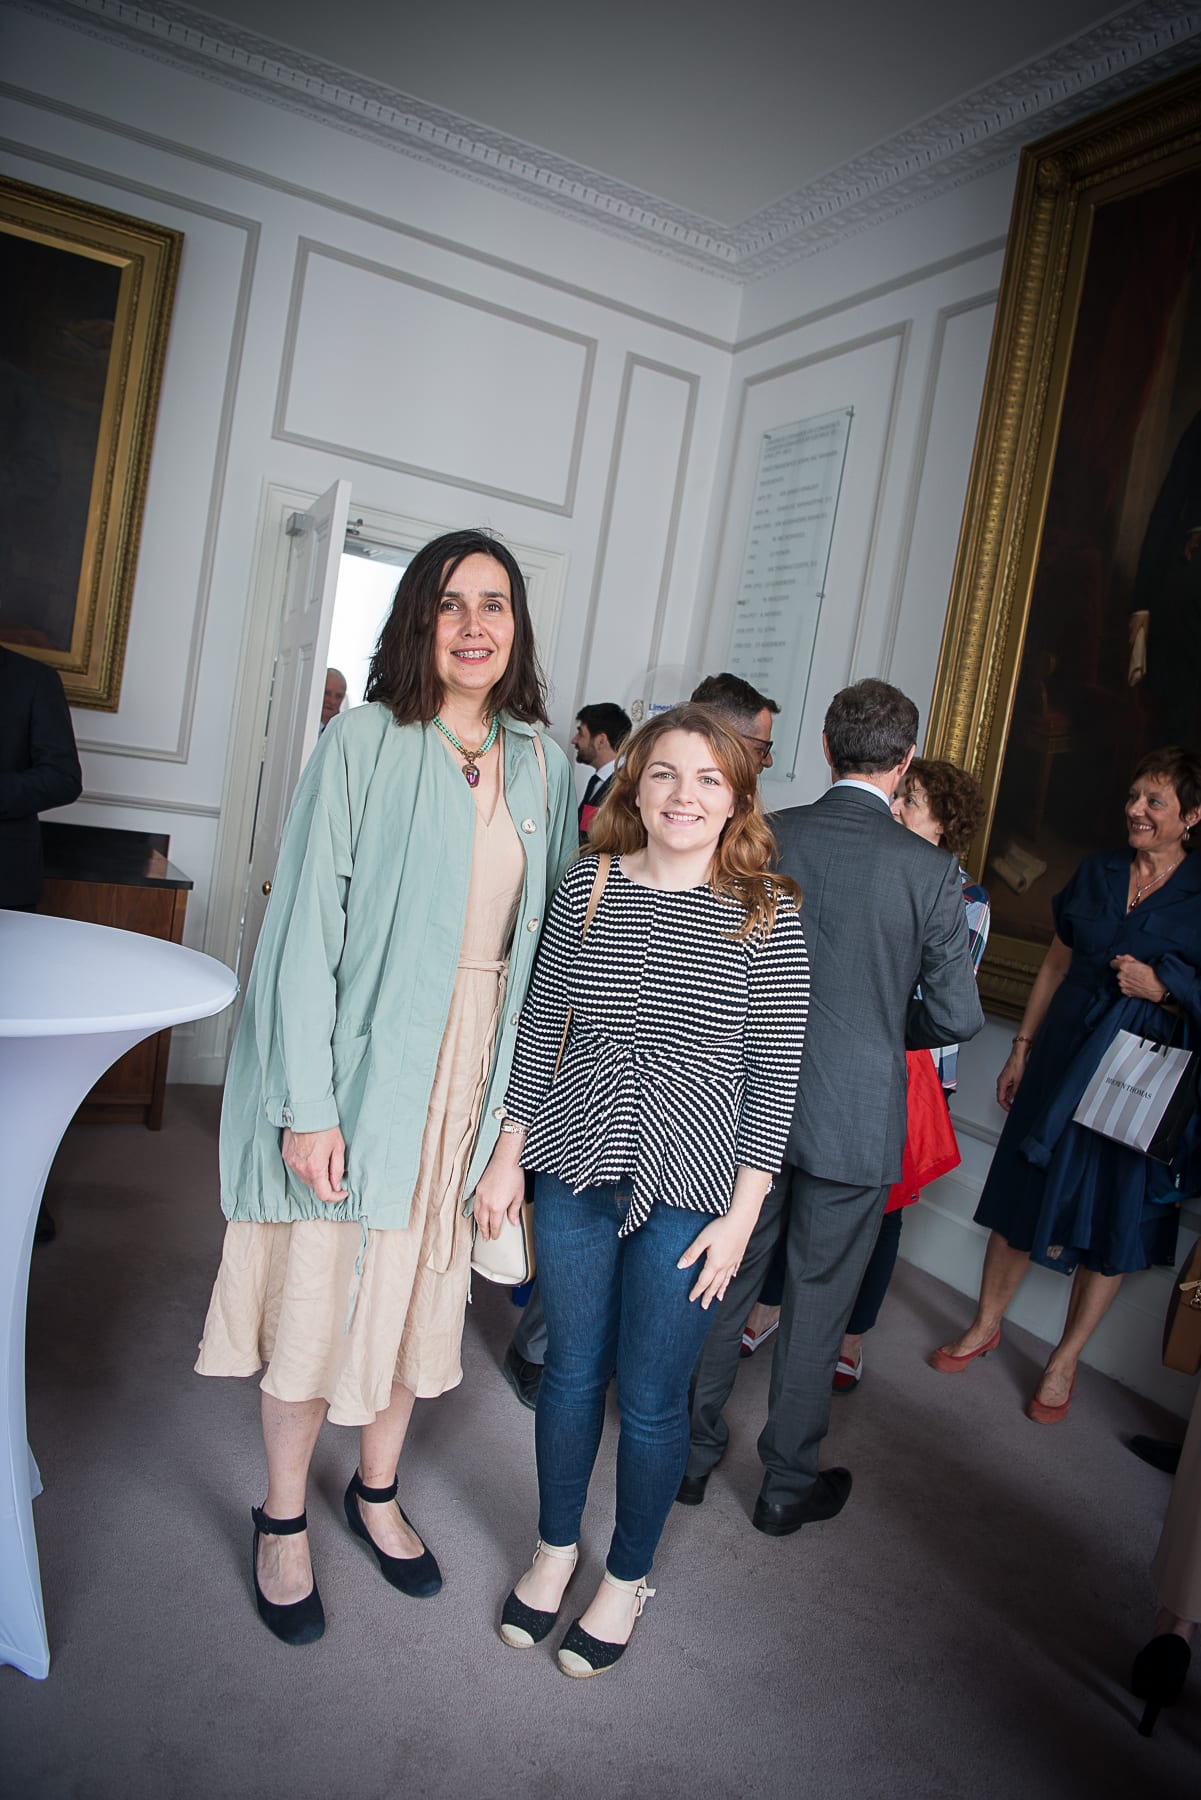 no repro fee- 
From Left to Right:  French Embassy Event which took place on the 18th June in the Limerick Chamber Boardroom:  Rebecca O’Grady - Mary Immaculate College, Sarah Clancy - Mary Immaculate College, 
Photo by Morning Star Photography